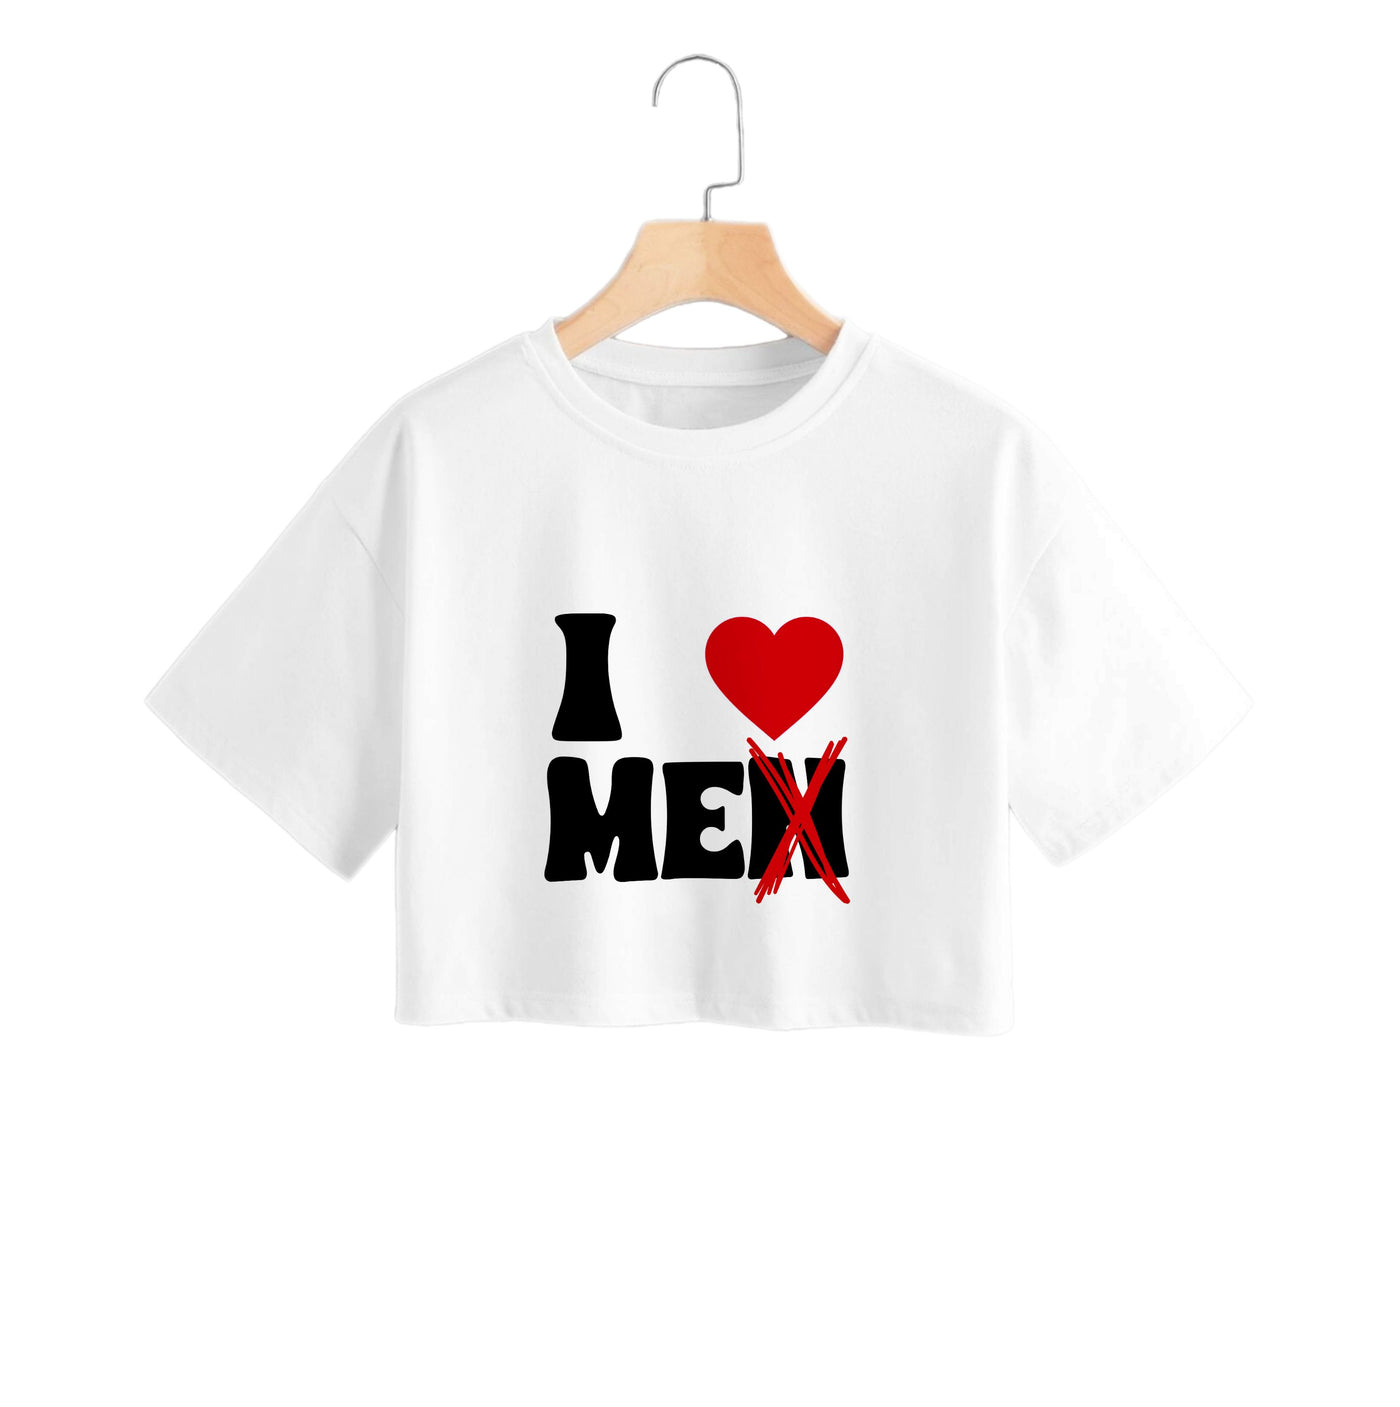 I Love Me - Funny Quotes Crop Top